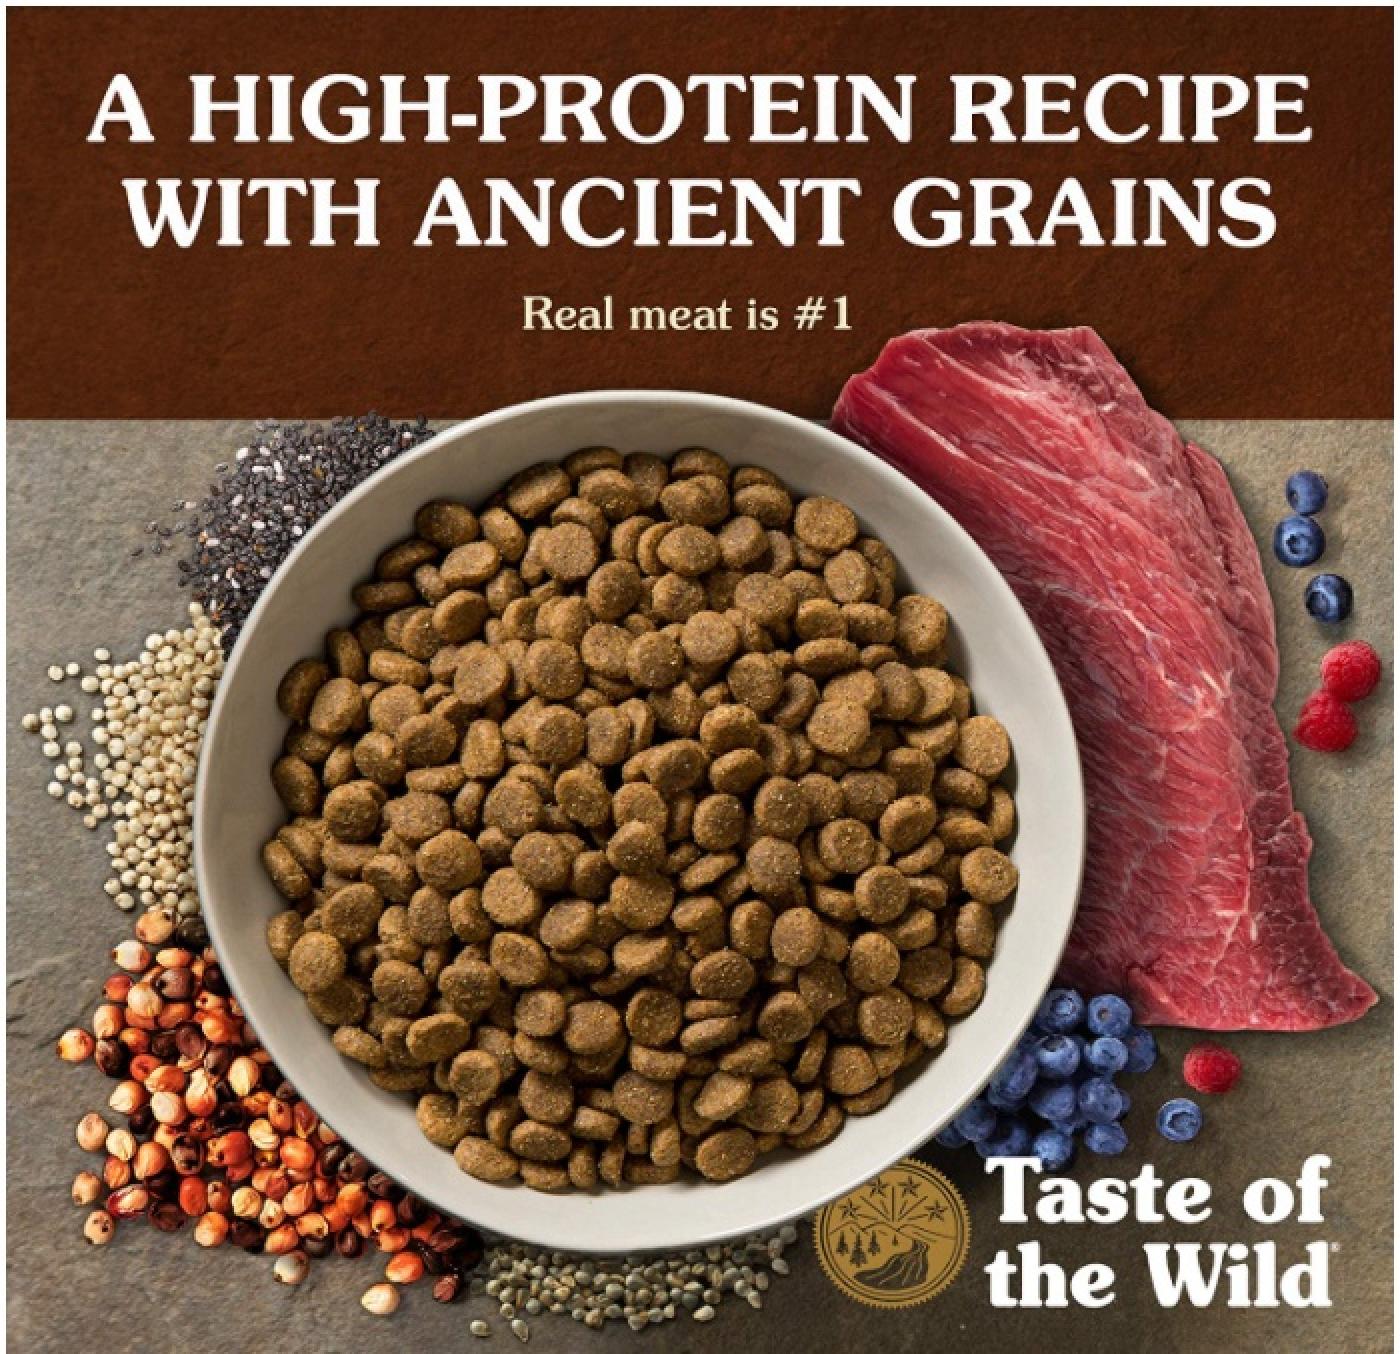 Taste of the Wild Ancient Prairie with Roasted Bison, Roasted Venison and Ancient Grains